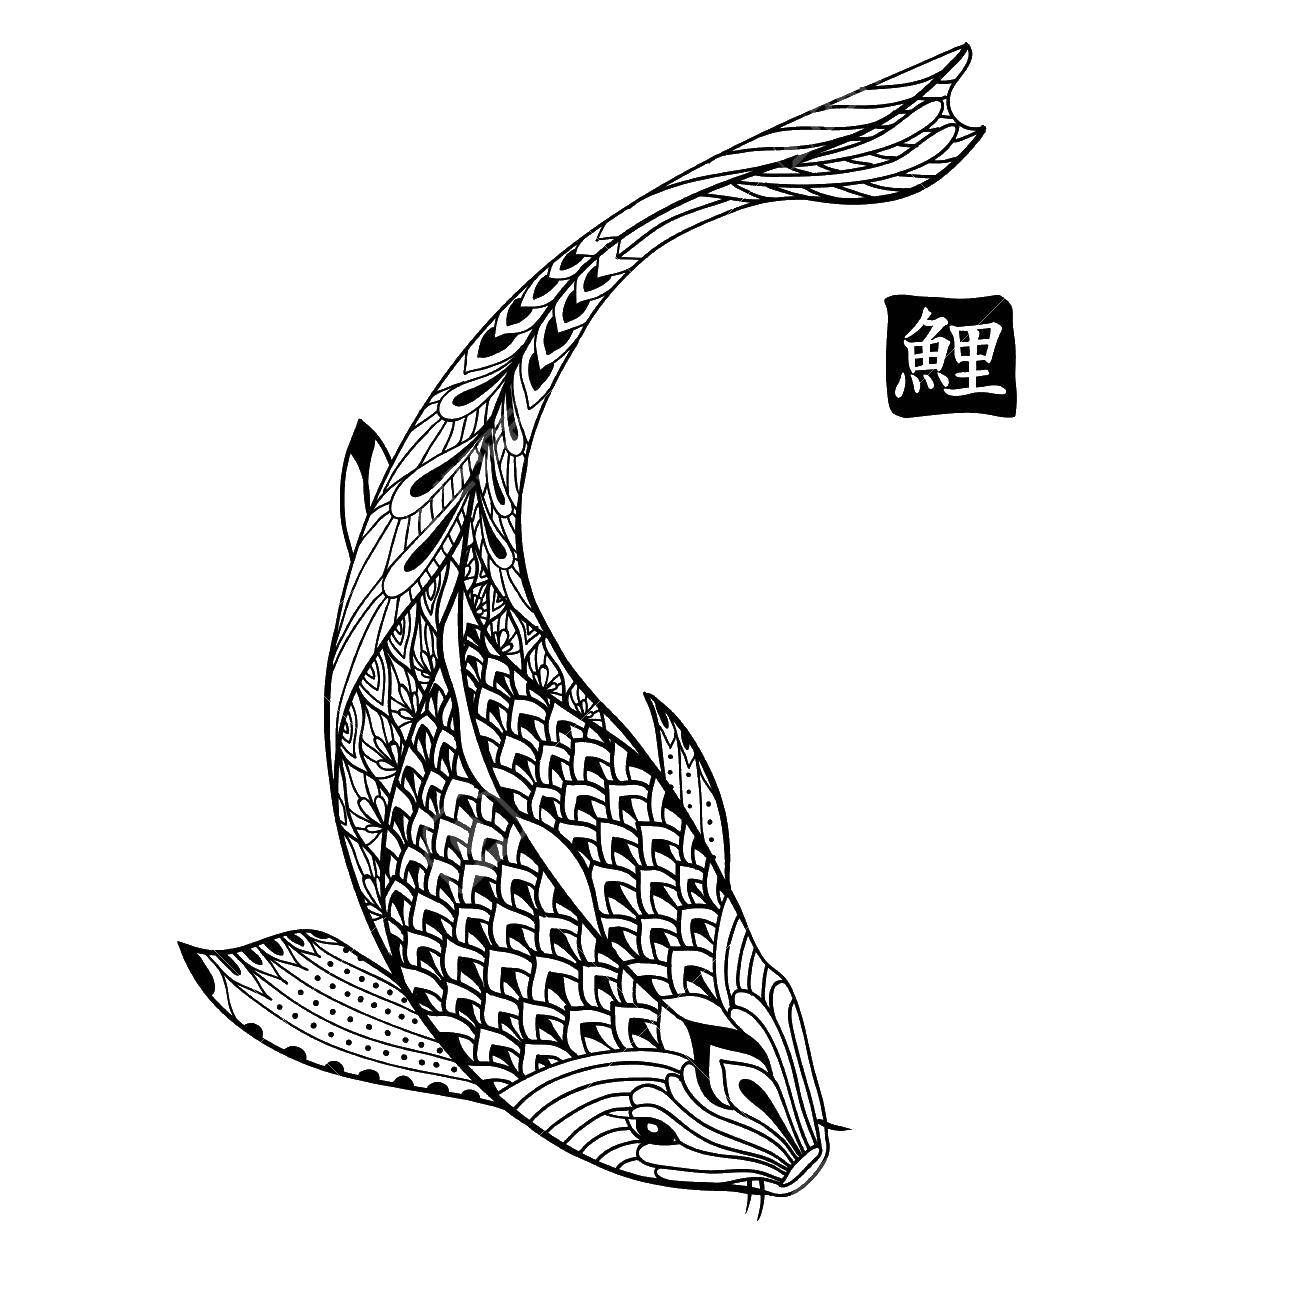 Coloring Patterned fish. Category fish. Tags:  fish, patterns, uzorchiki.